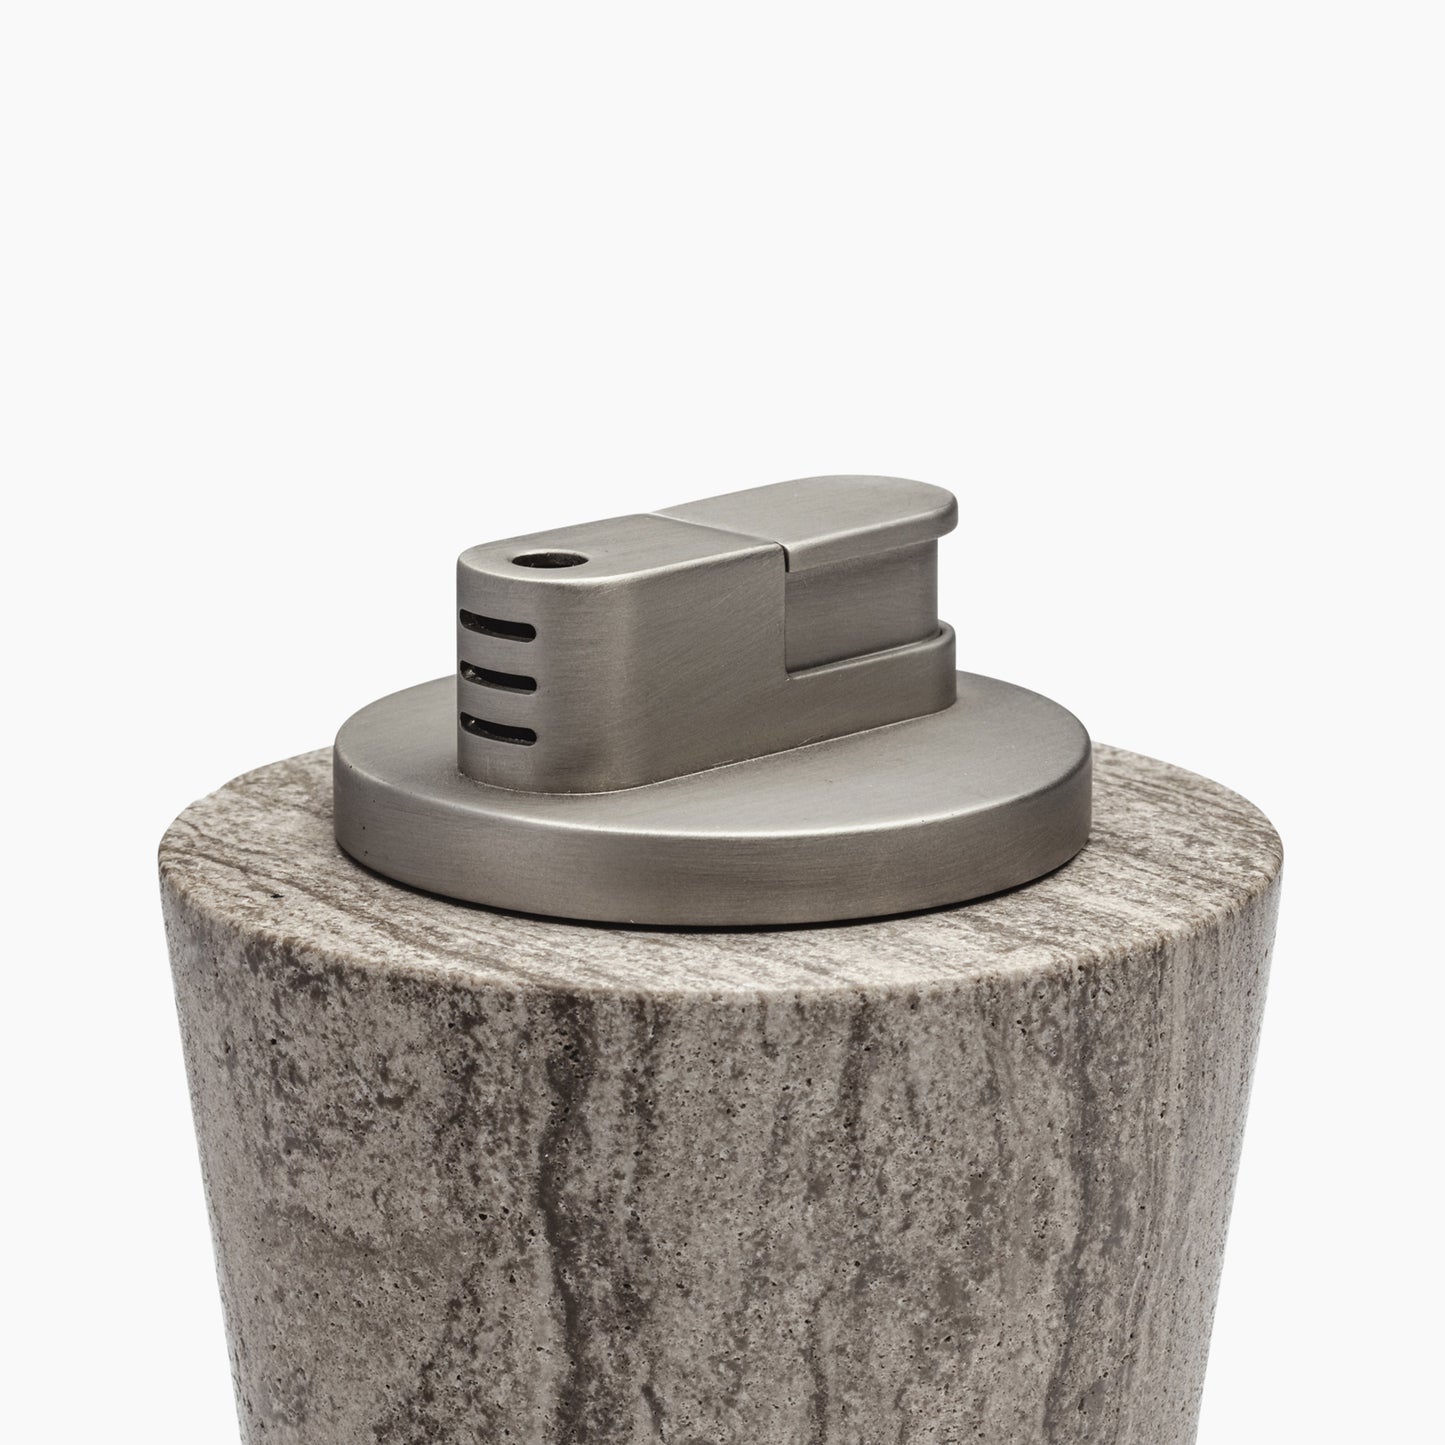 TABLE LIGHTER IN GREY ATHENS MARBLE WITH NICKEL INSERT